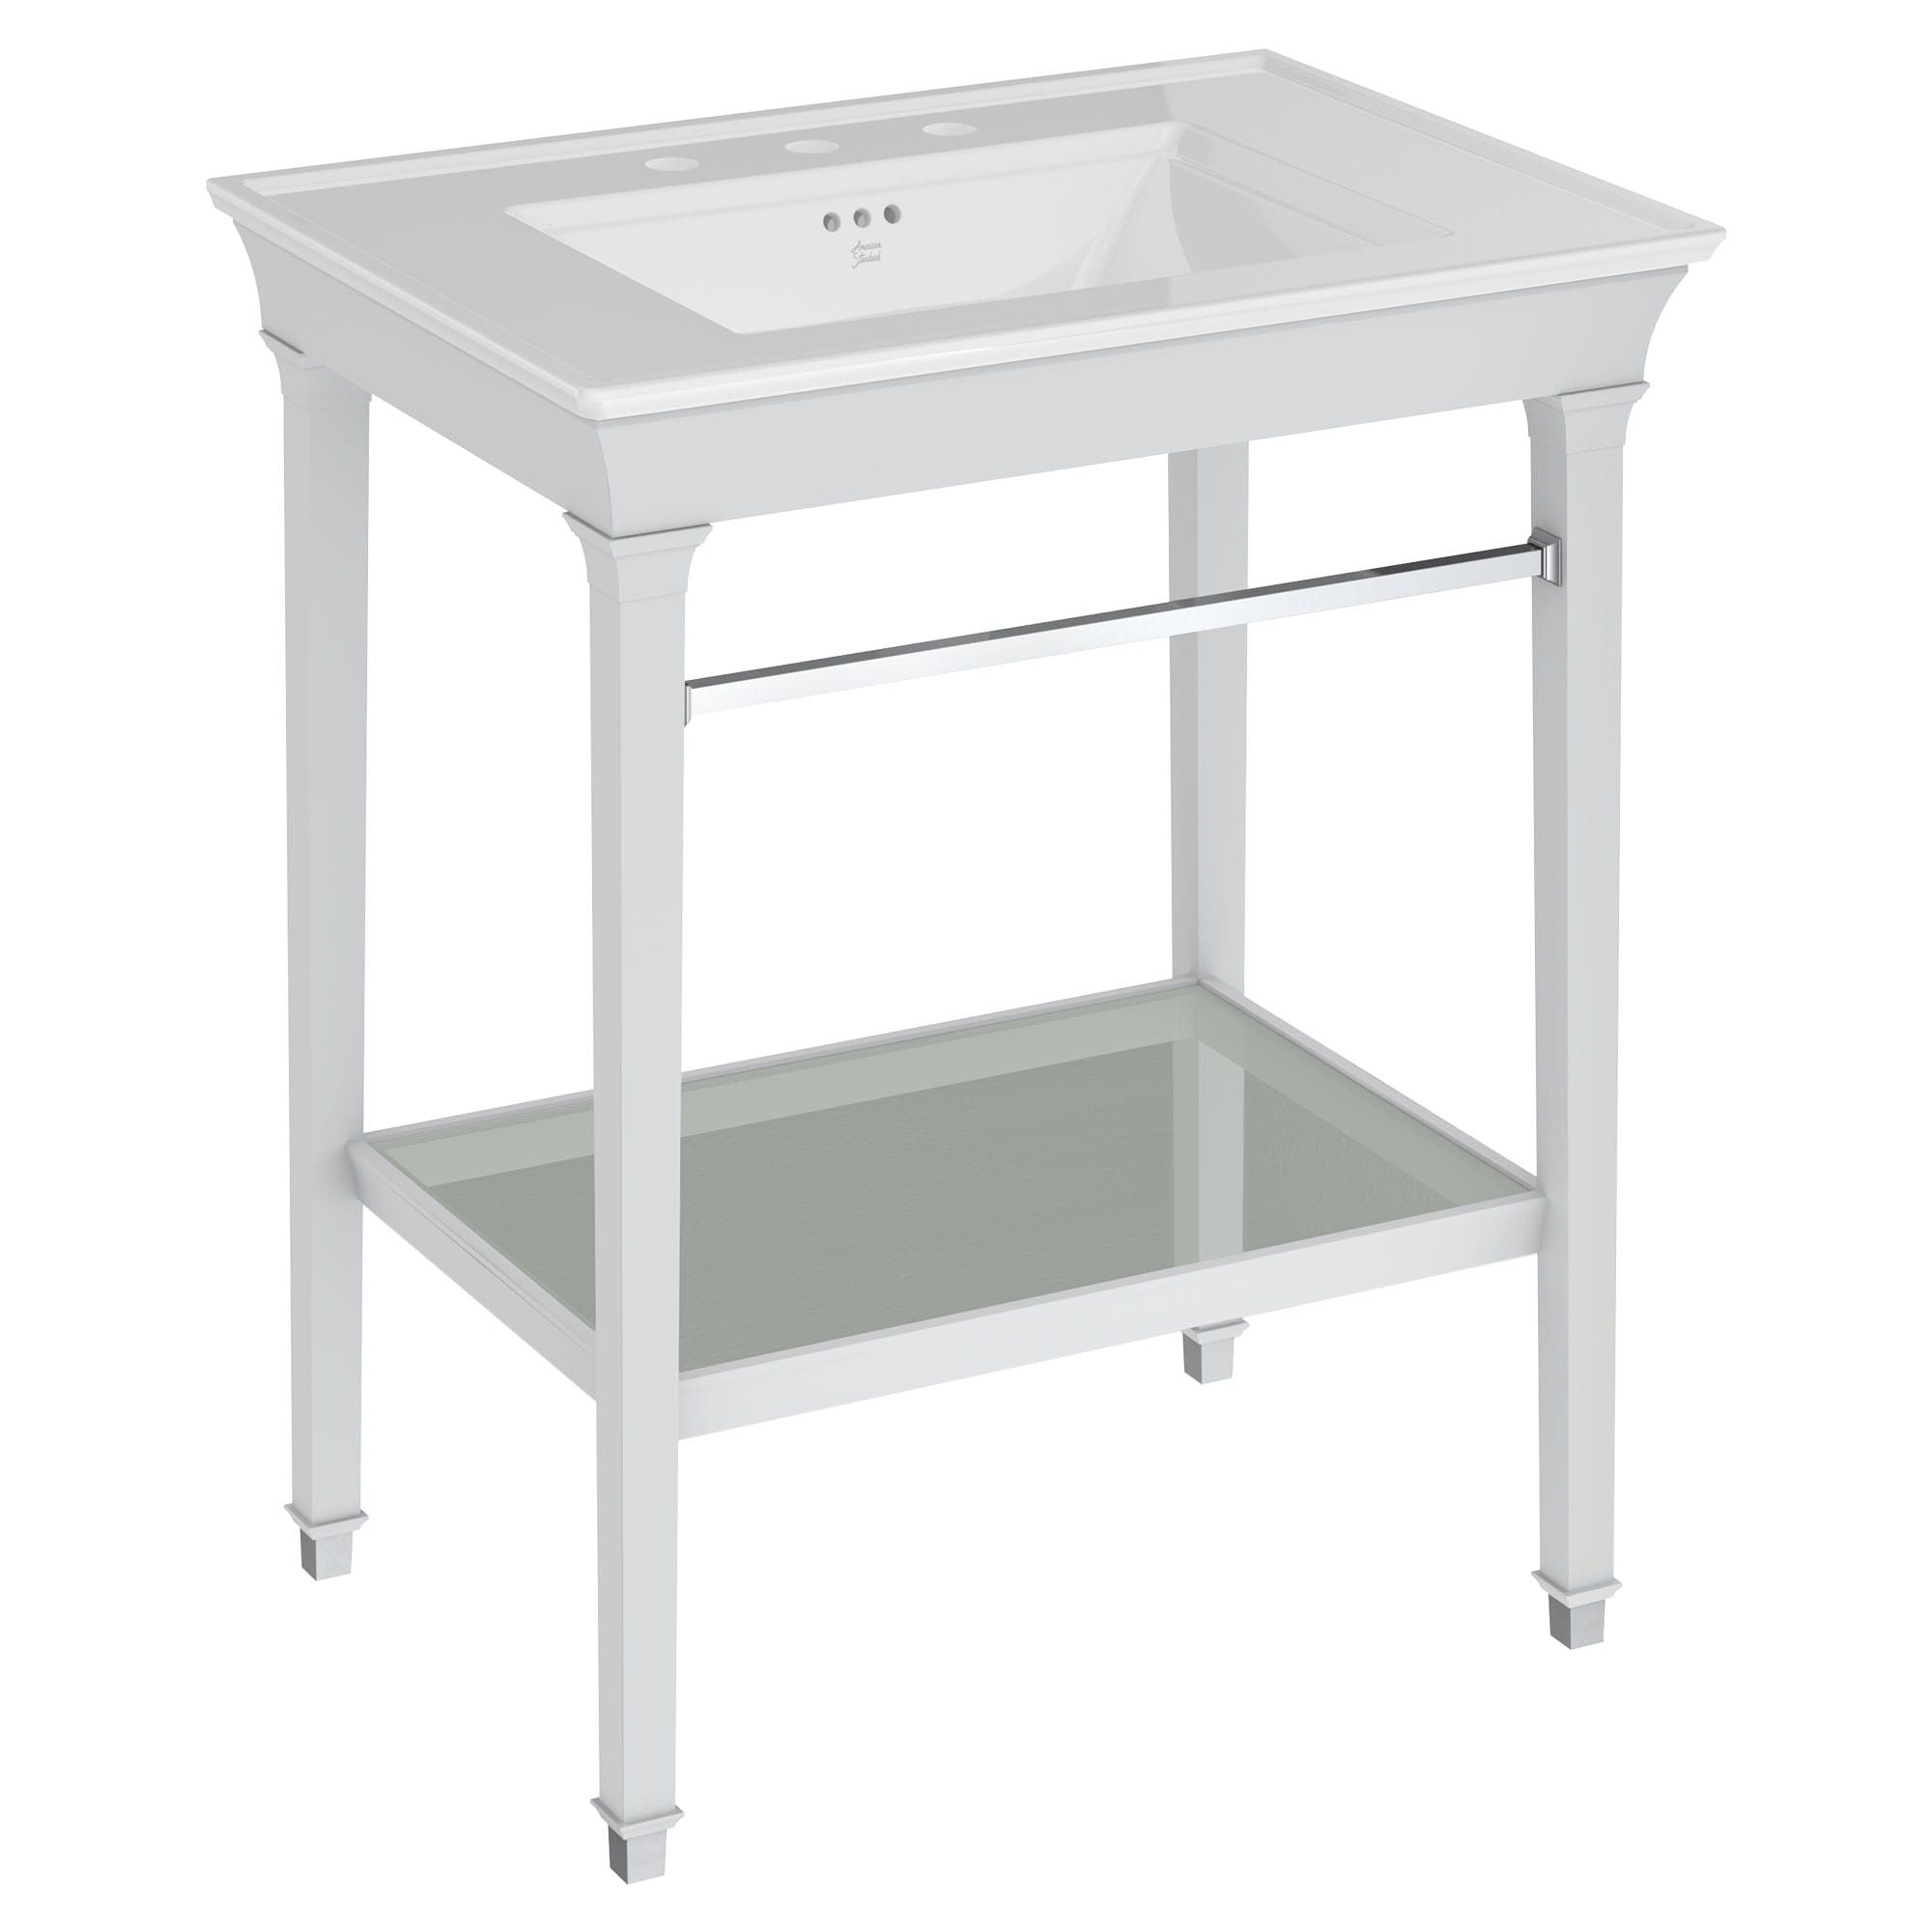 Town Square S Washstand Towel Bar CHROME